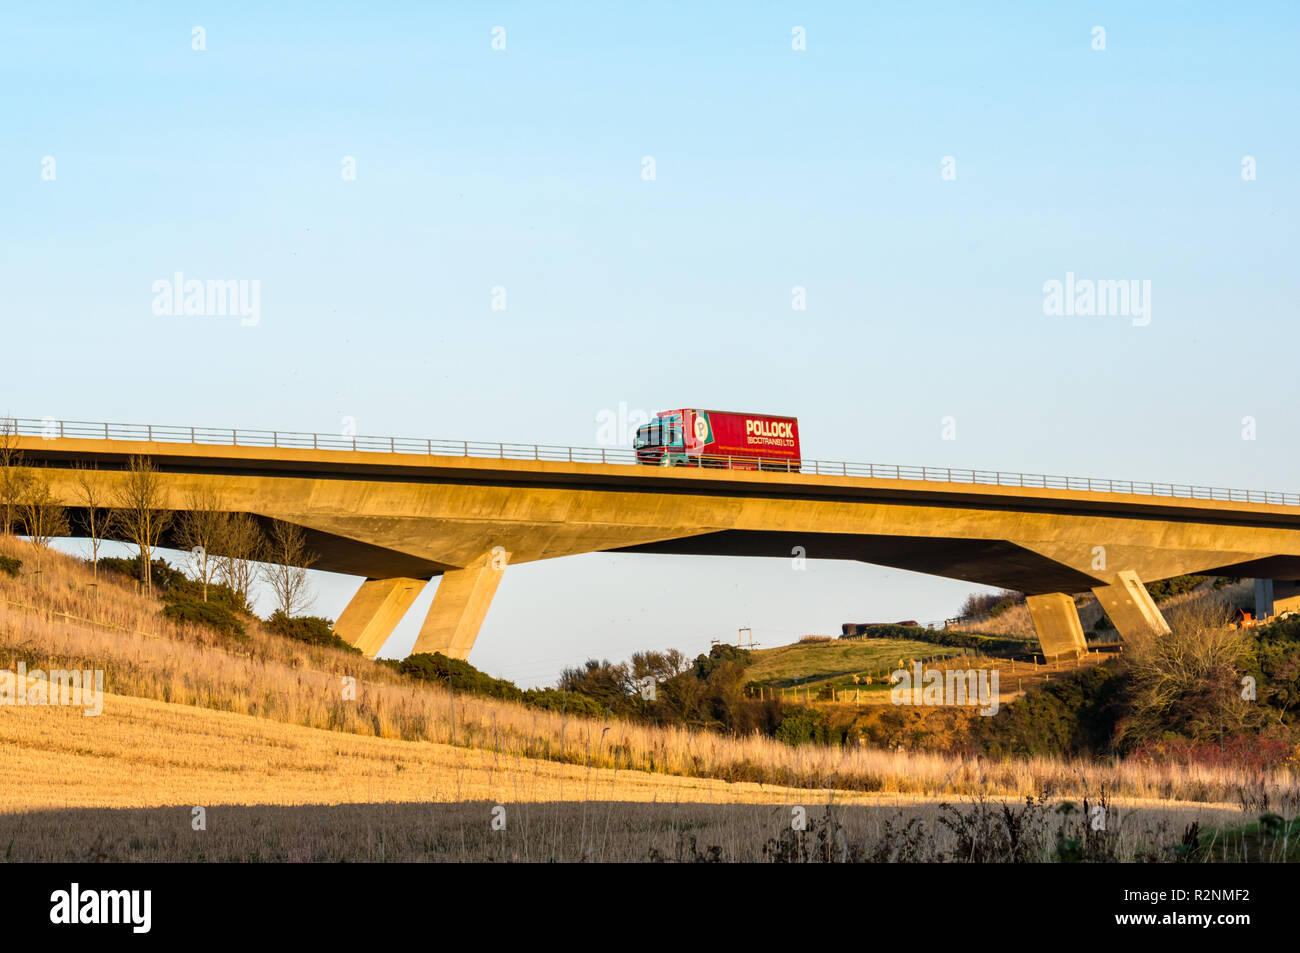 Pollock transport lorry on River Tyne concrete flyover bridge by Balfour Beatty Civil Engineering on A1 dual carriageway, East Lothian, Scotland, UK Stock Photo